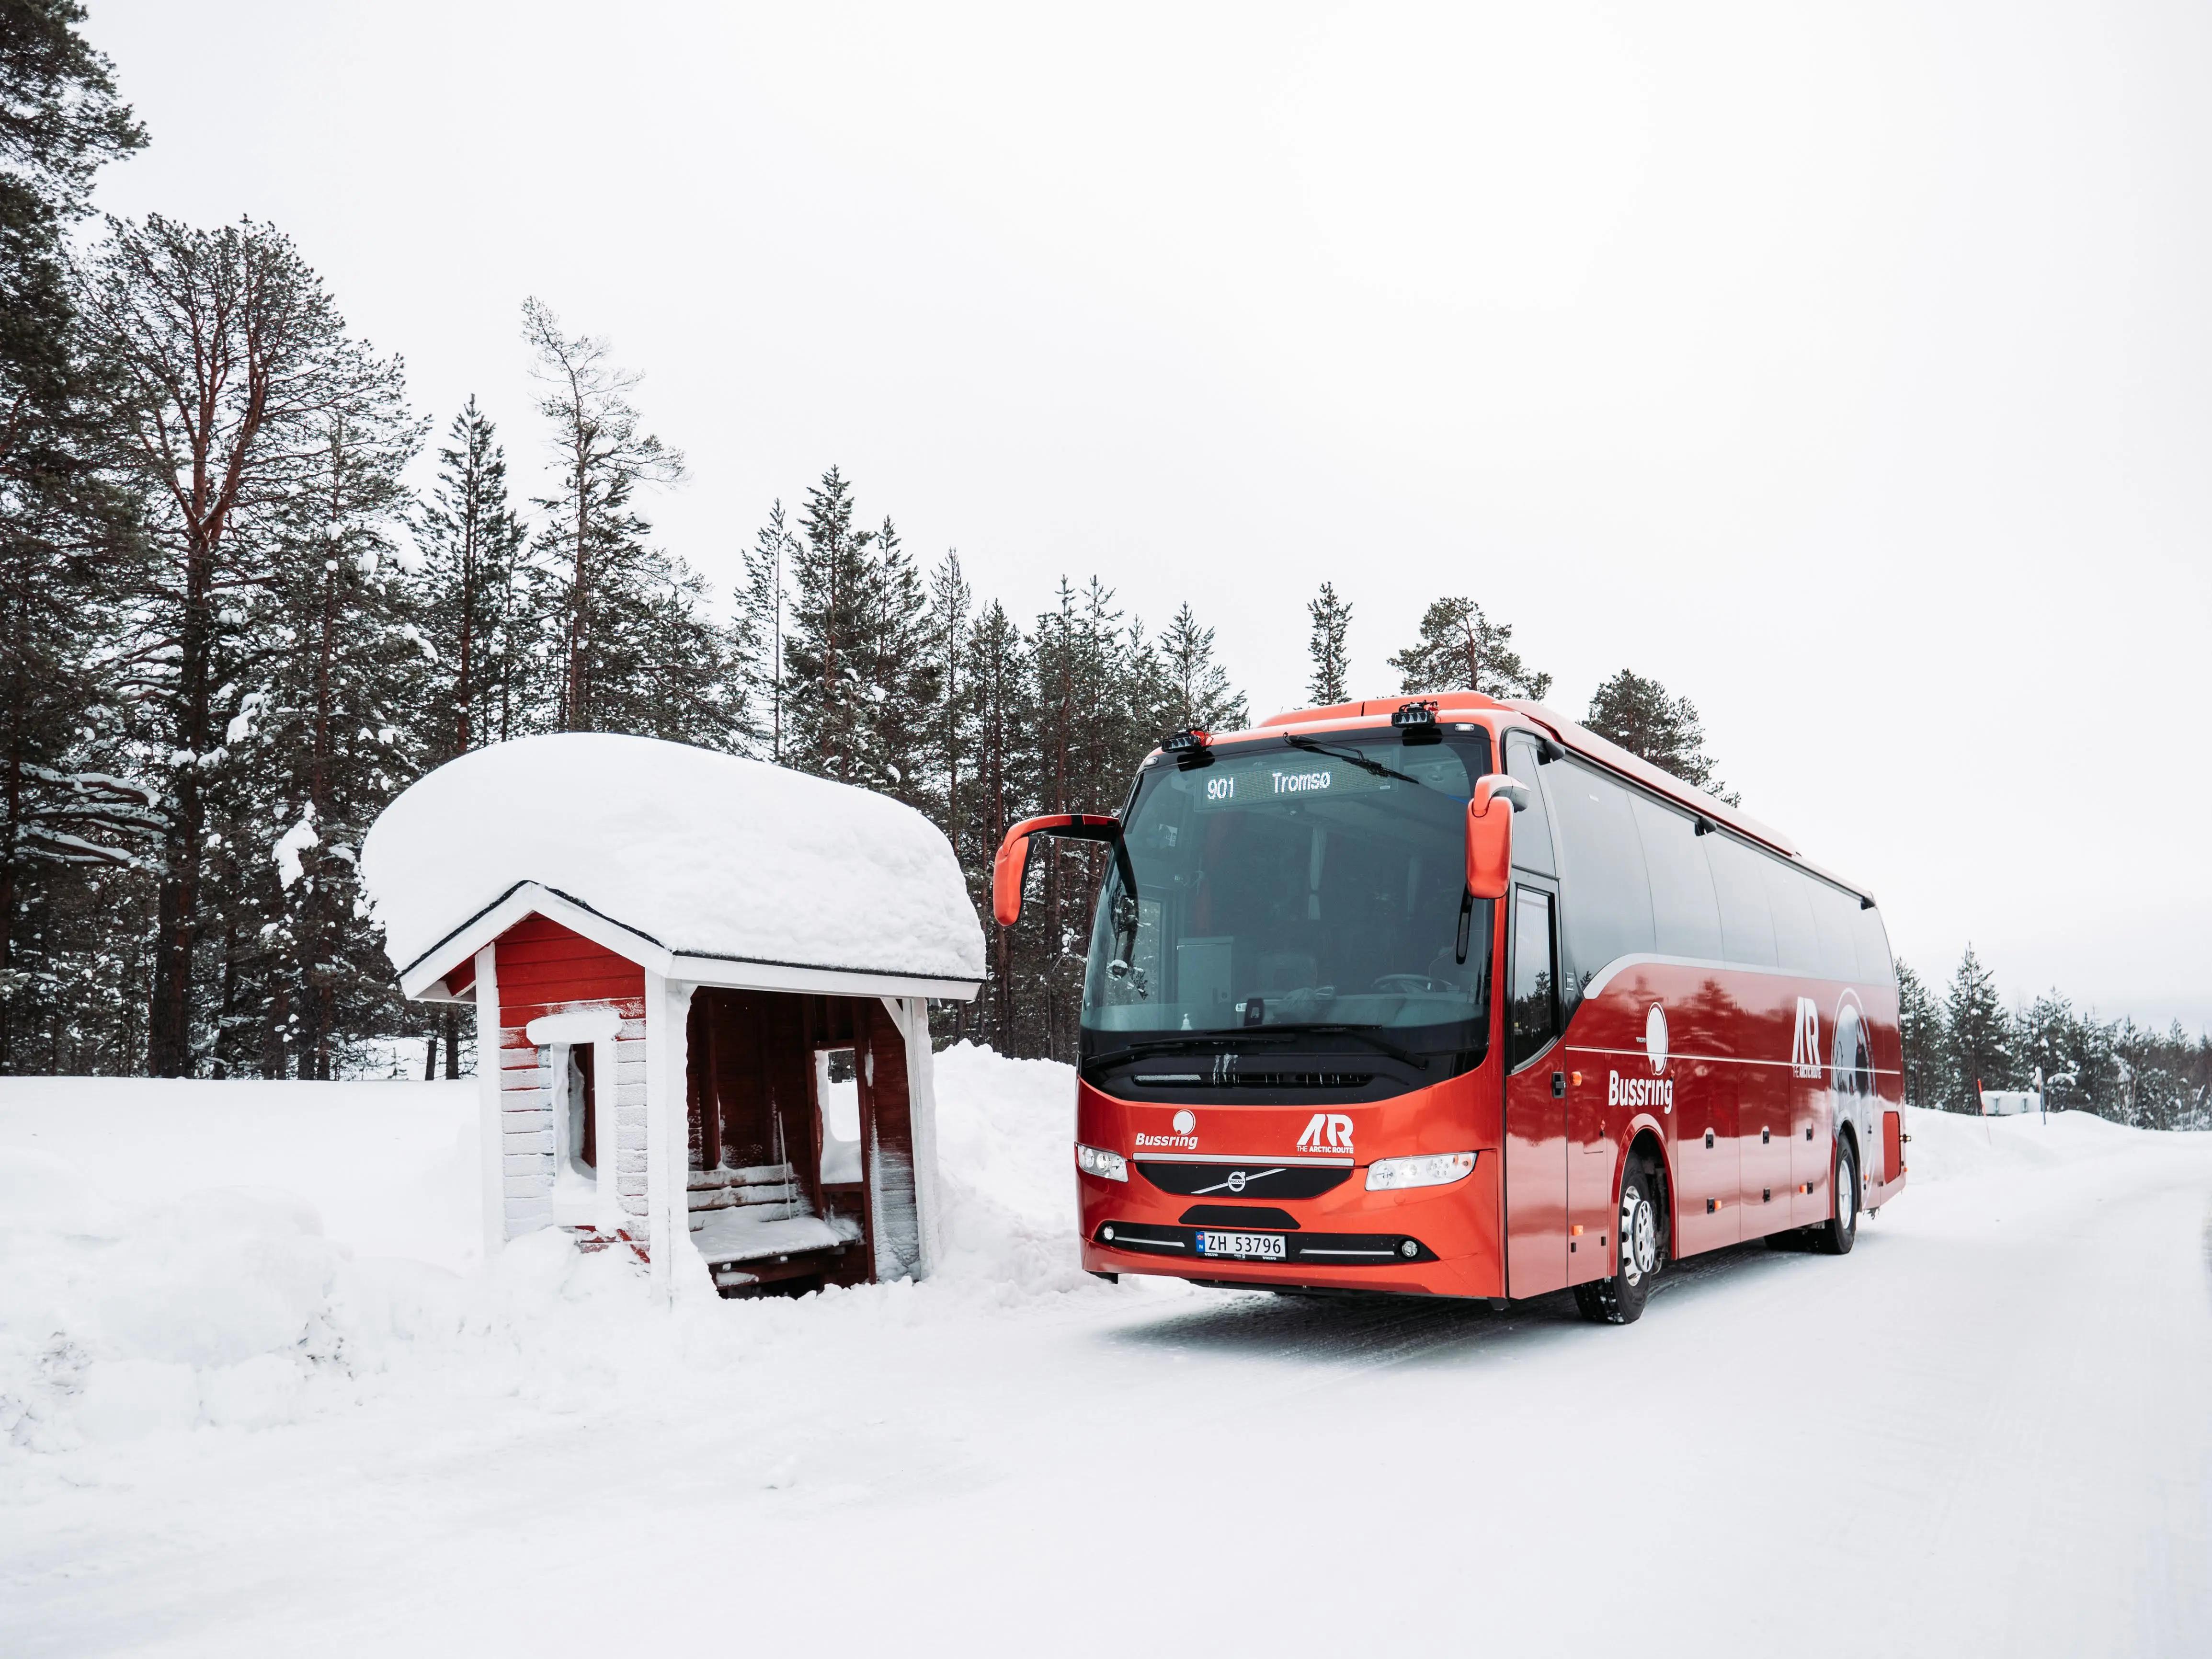 The Arctic Route bus on the way from Tromsø to Lyngen North